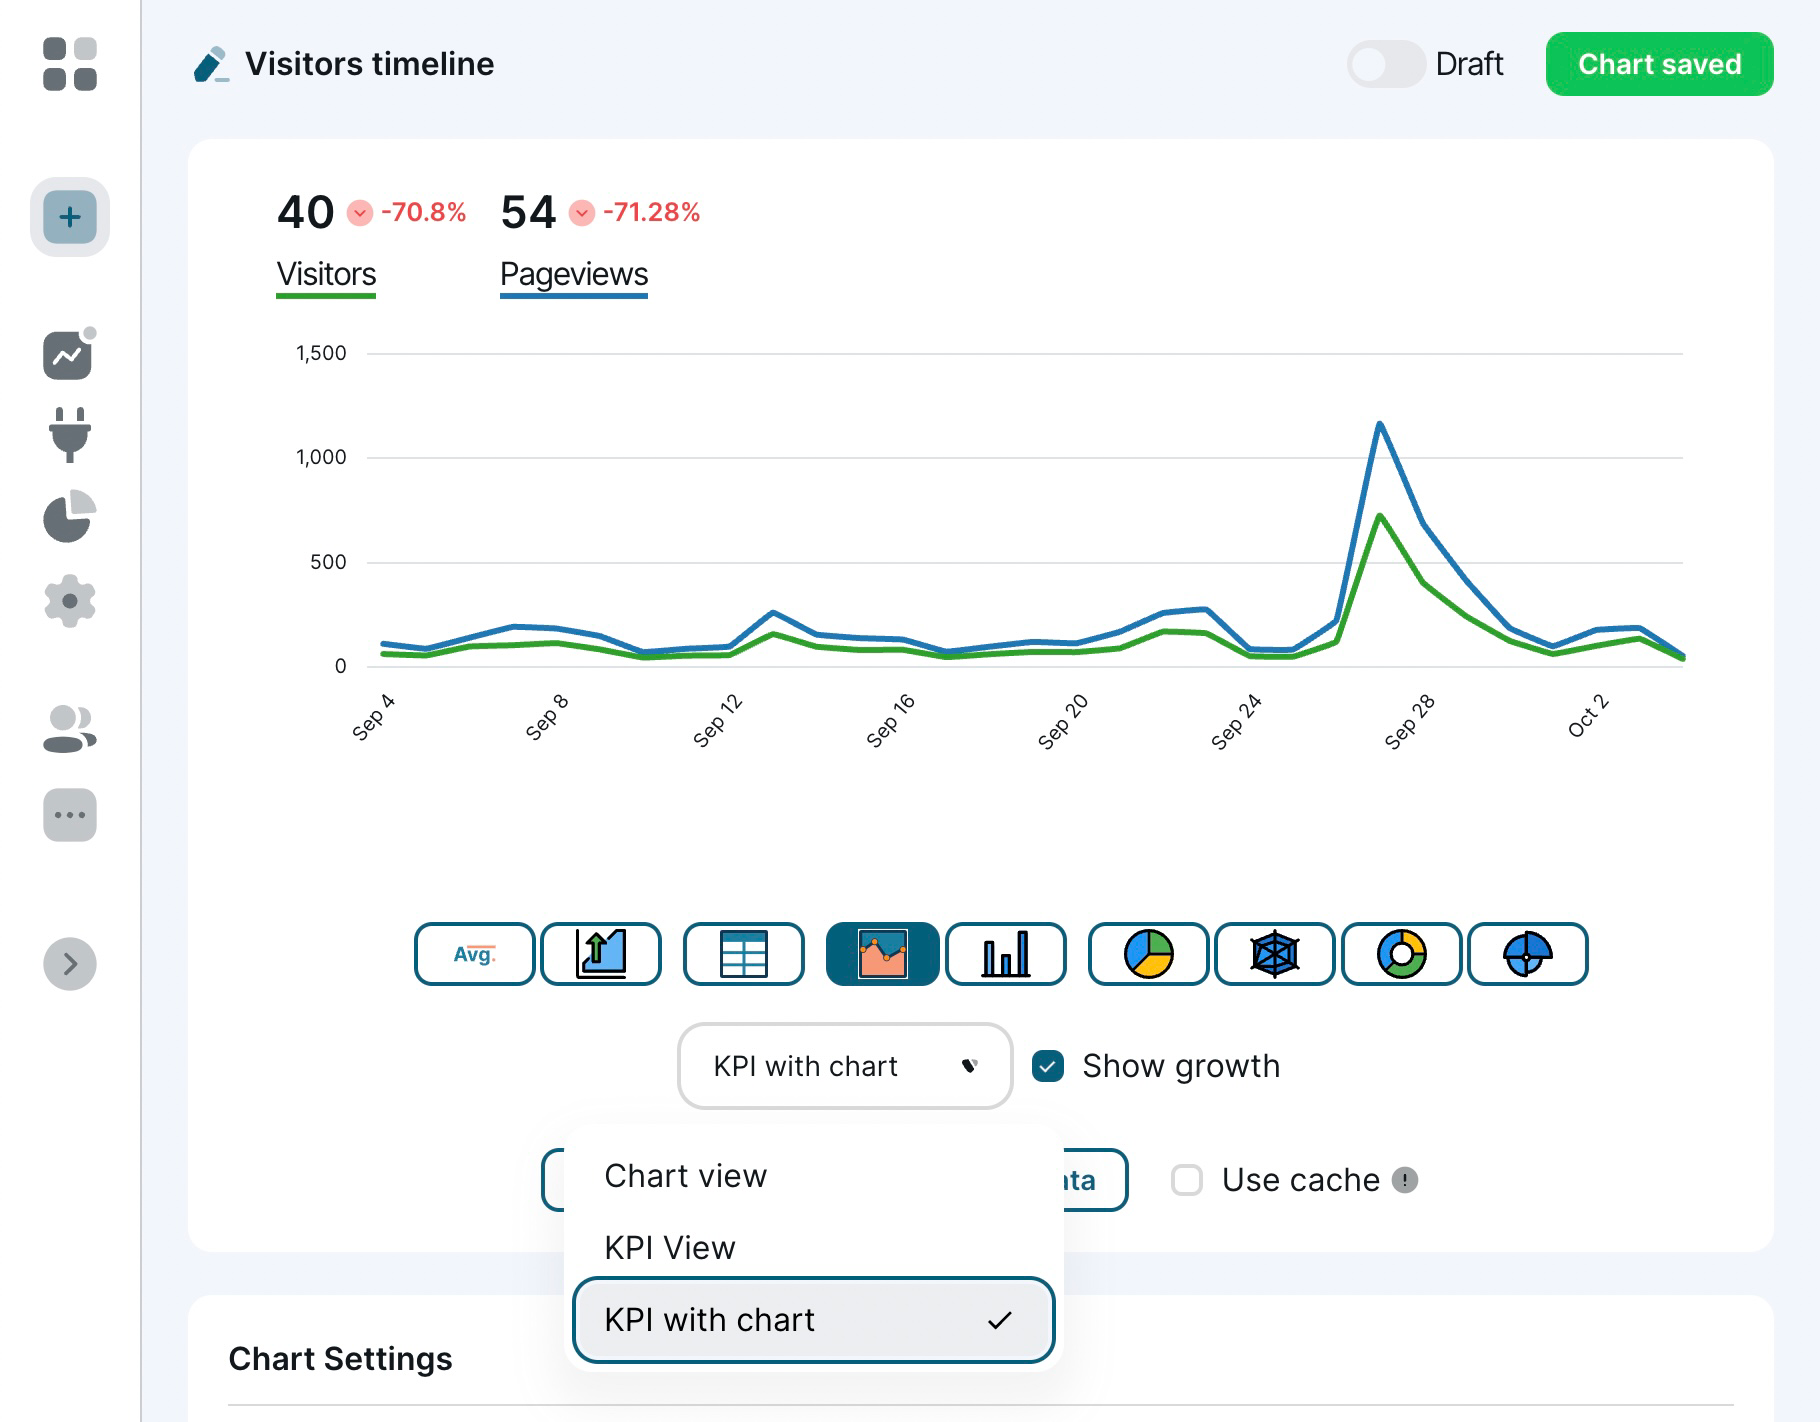 The new KPI and growth view in Chartbrew